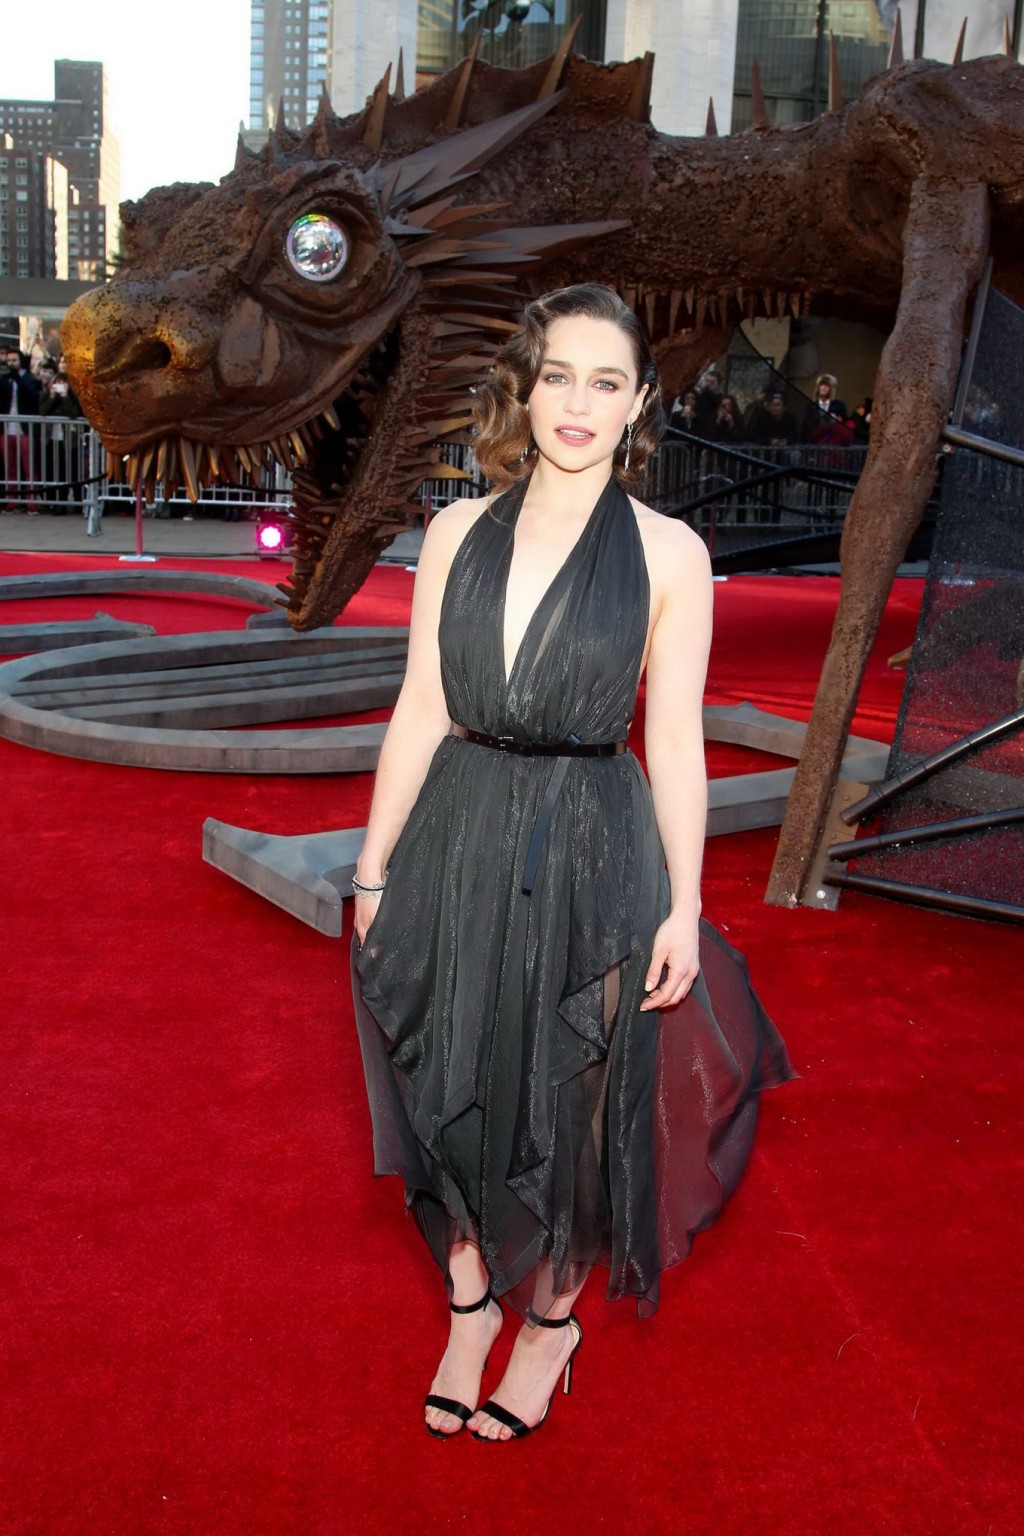 Emilia Clarke braless wearing black partially see-through dress at the Game of T #75201462